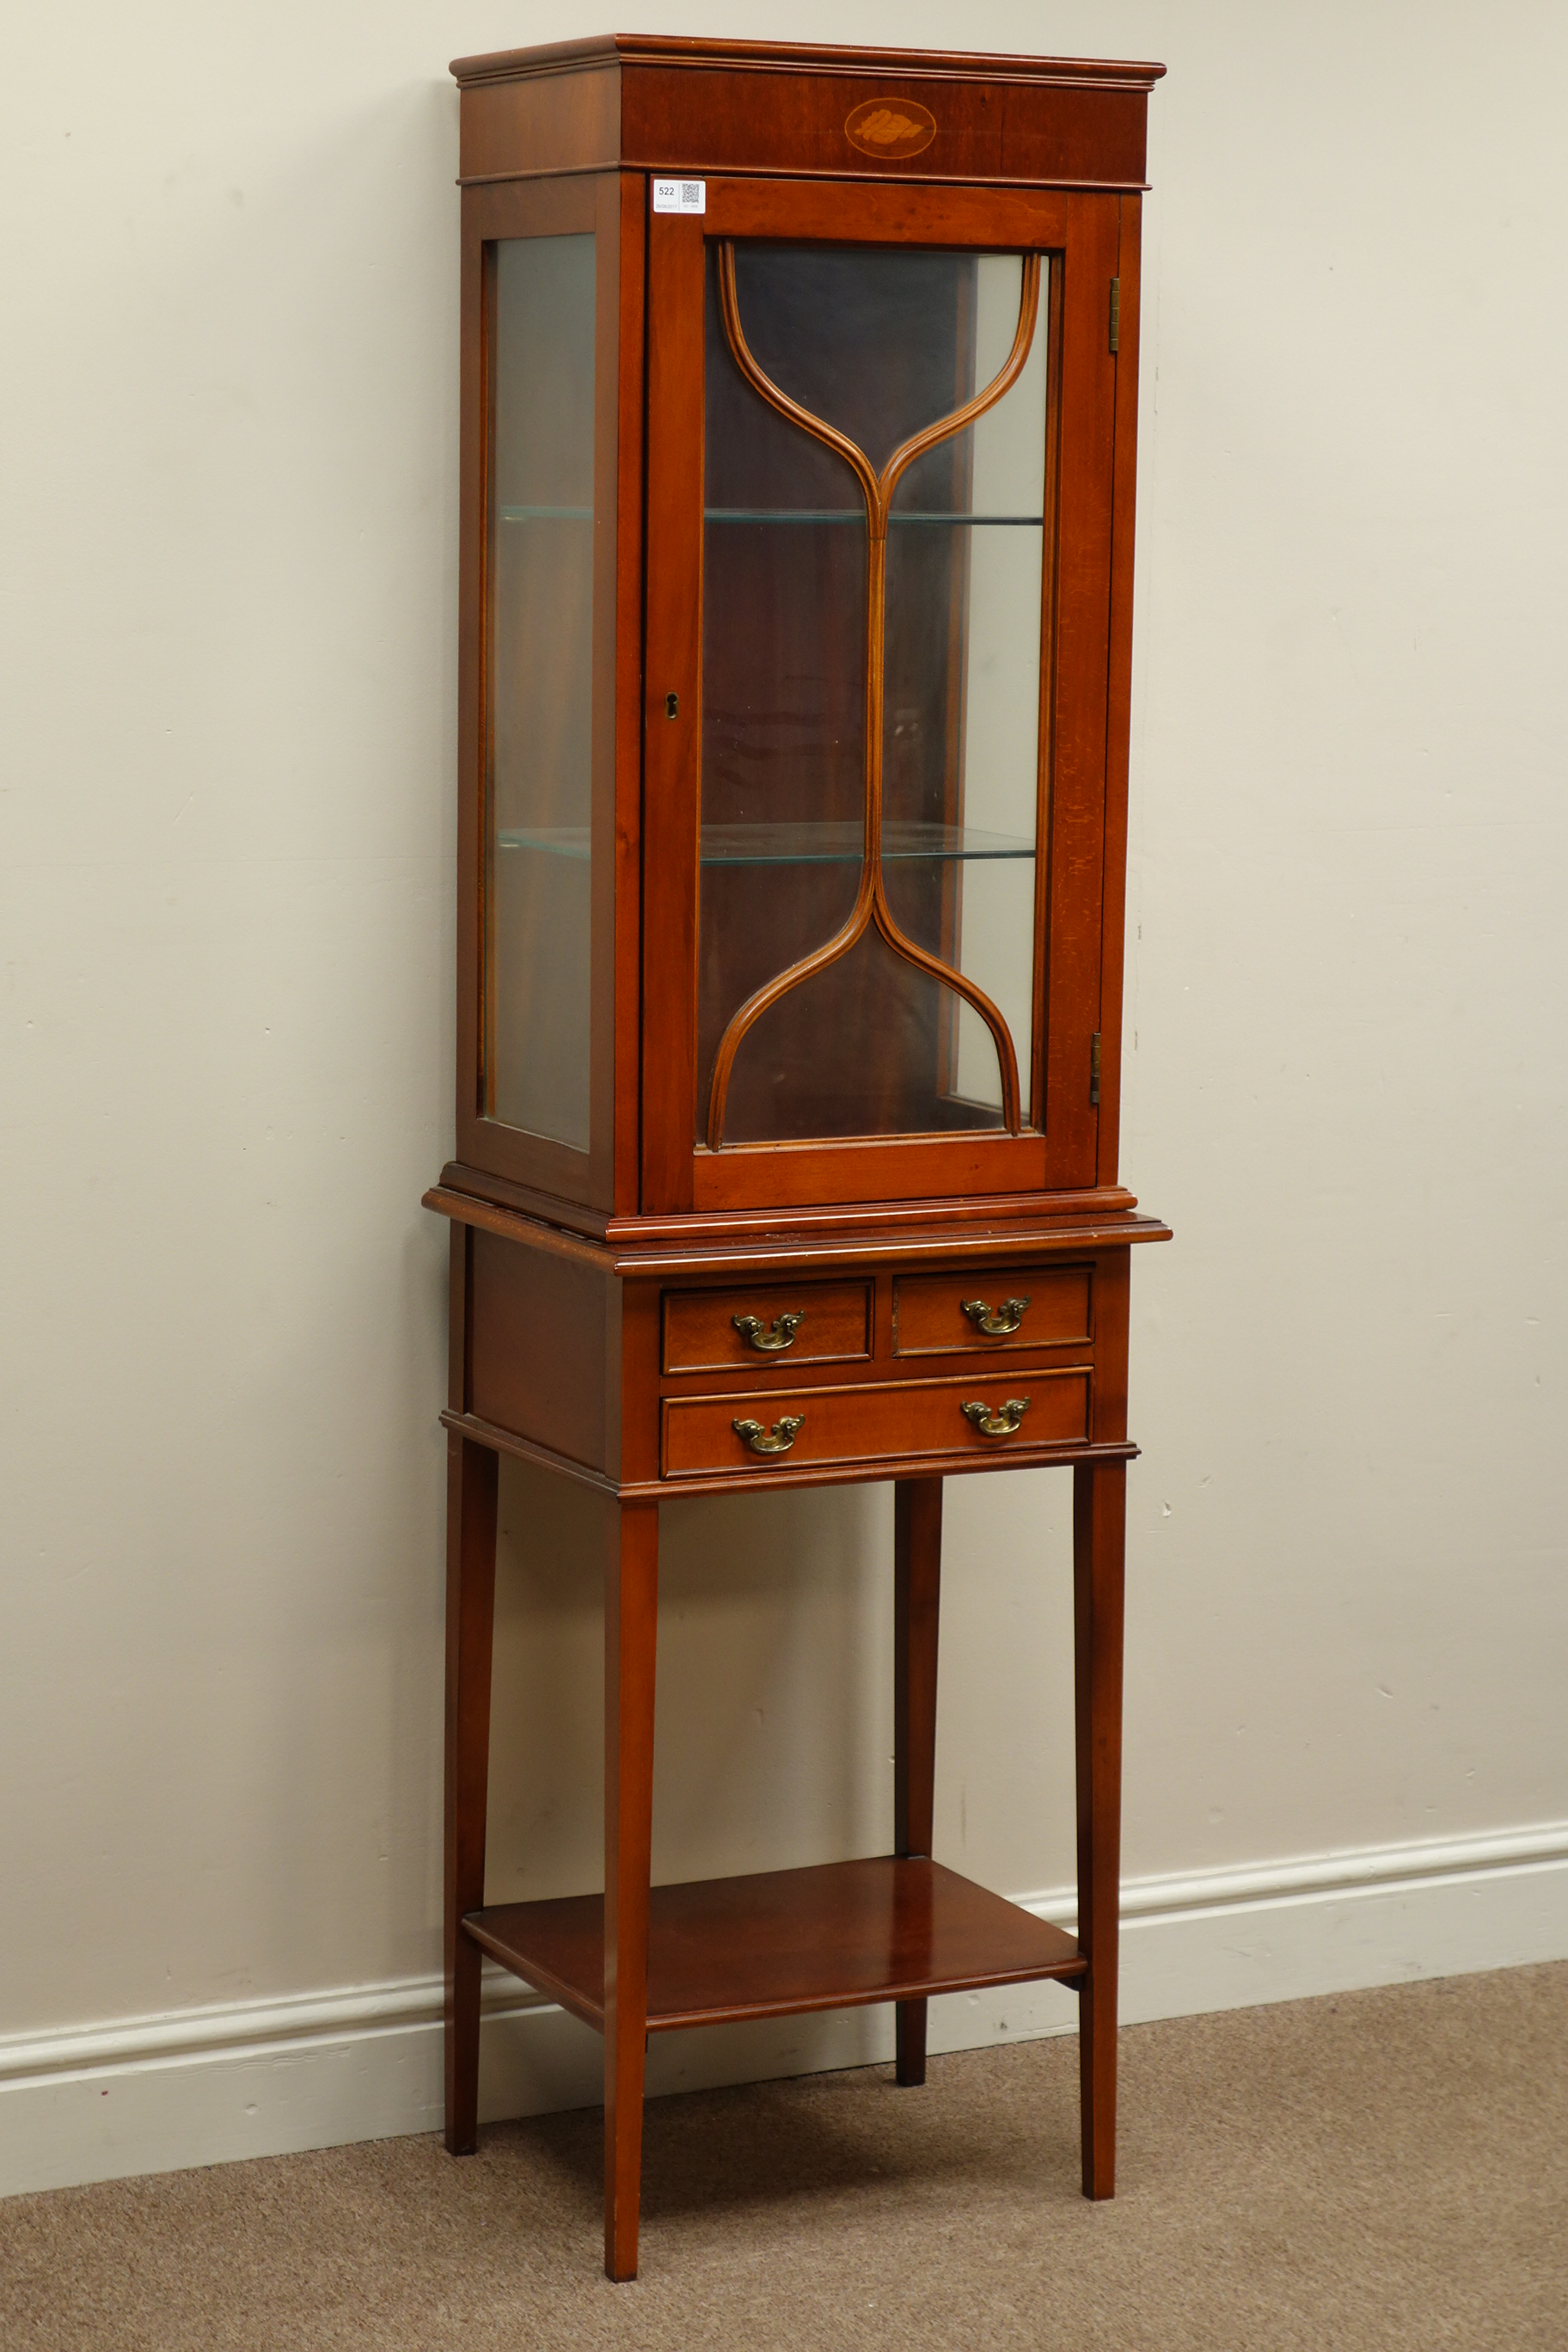 Small reproduction mahogany finish display cabinet on stand,